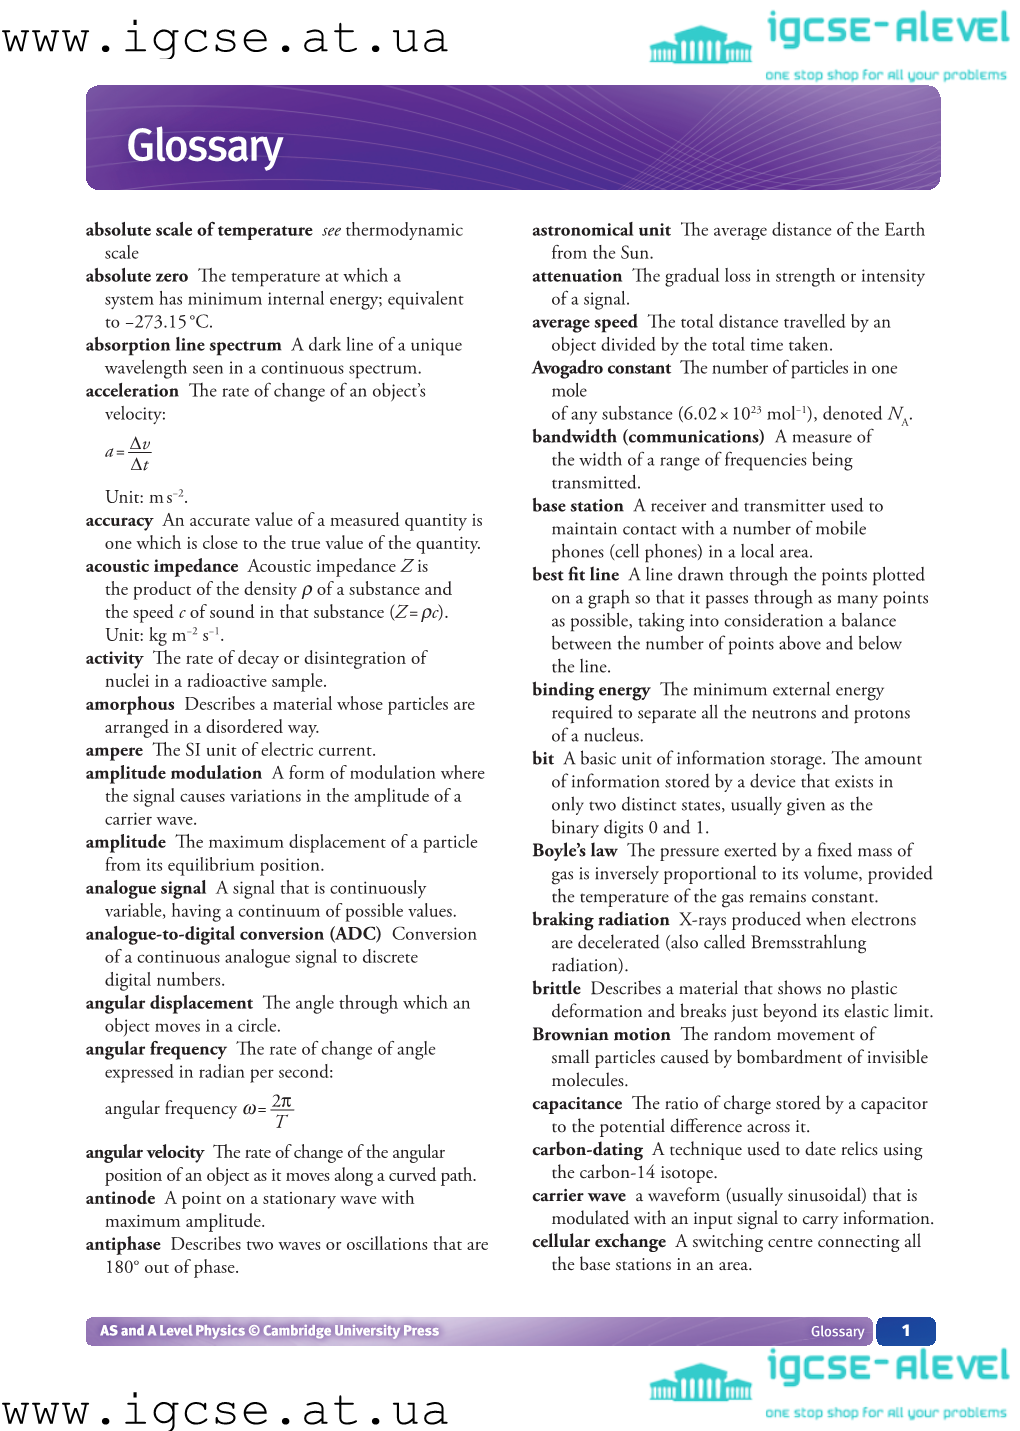 AS&A Physics CD-ROM Glossary.Indd